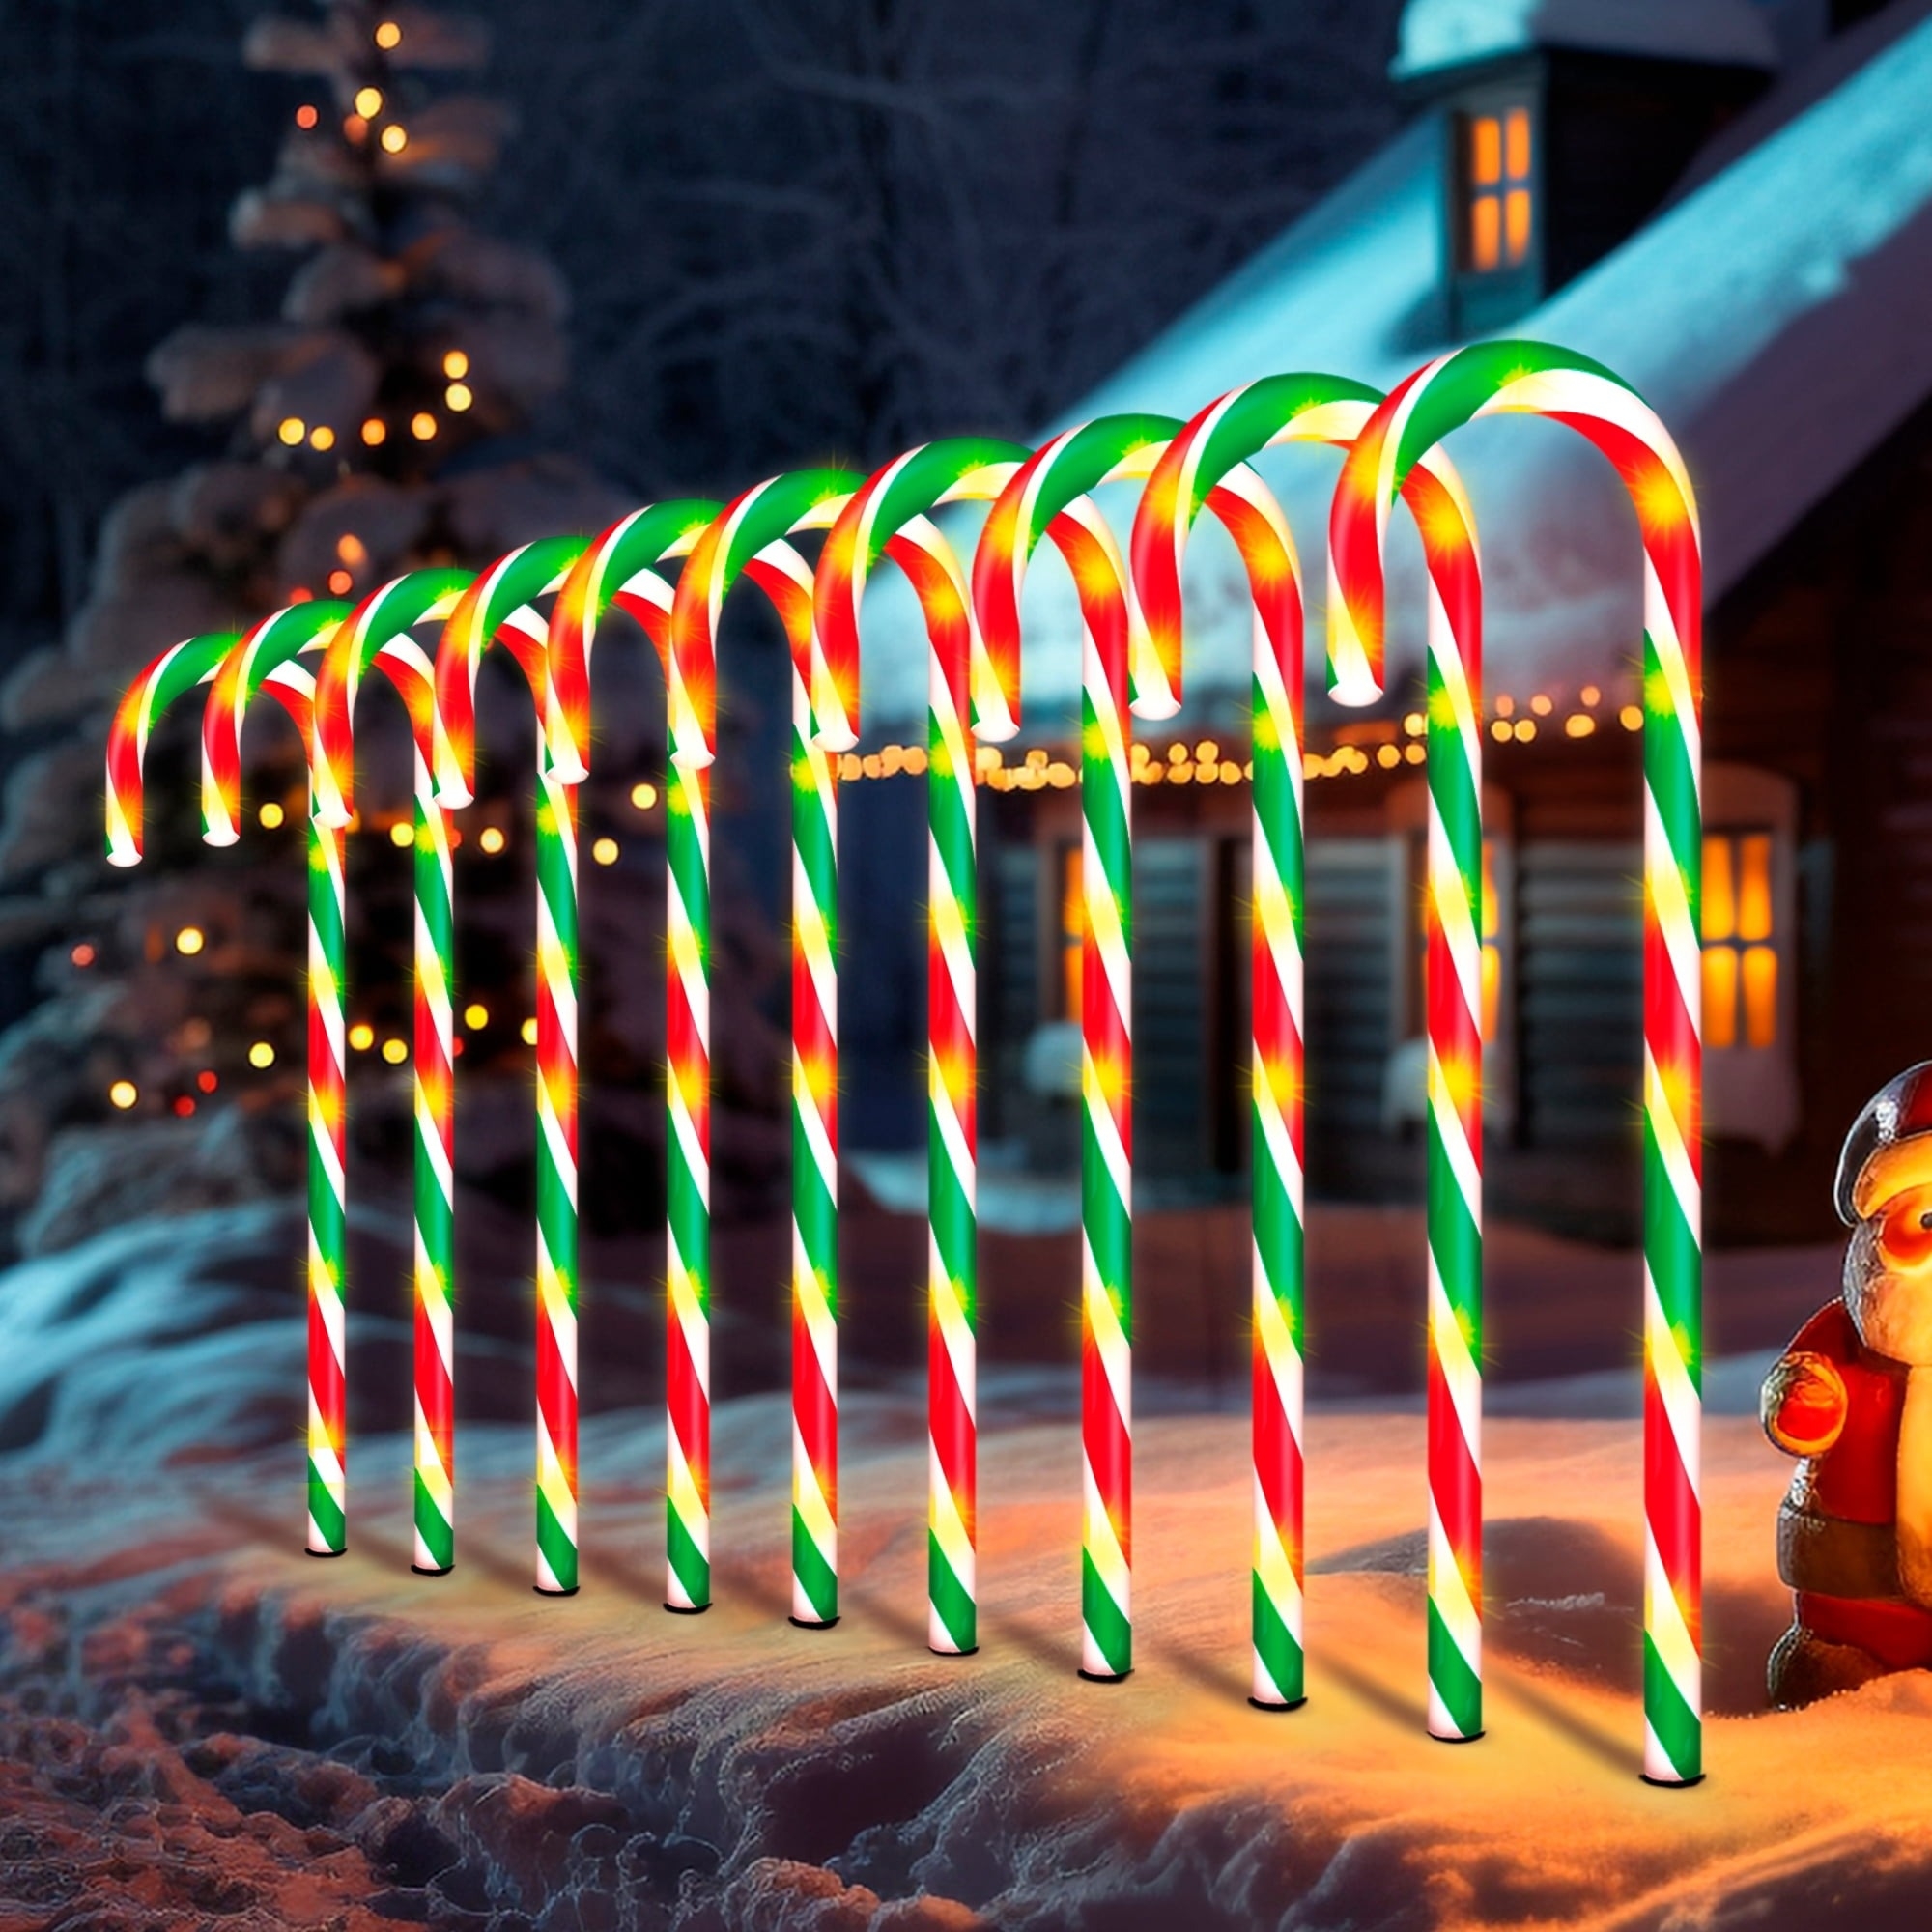 red, green, and white candy cane pathway lights at night